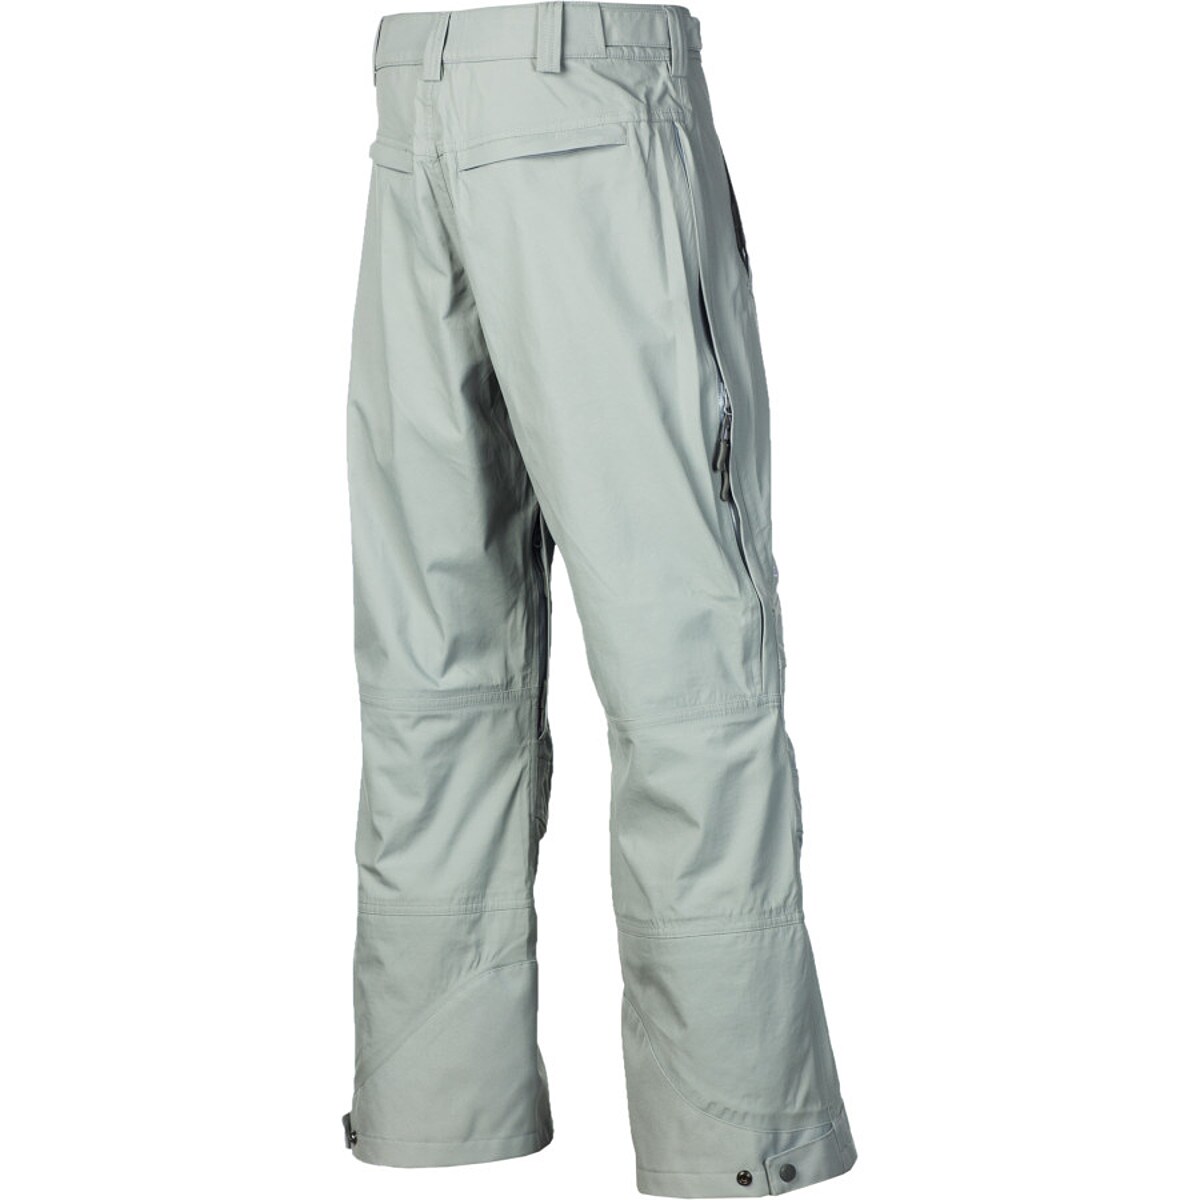 2022 Chemical Pant - Now On Sale